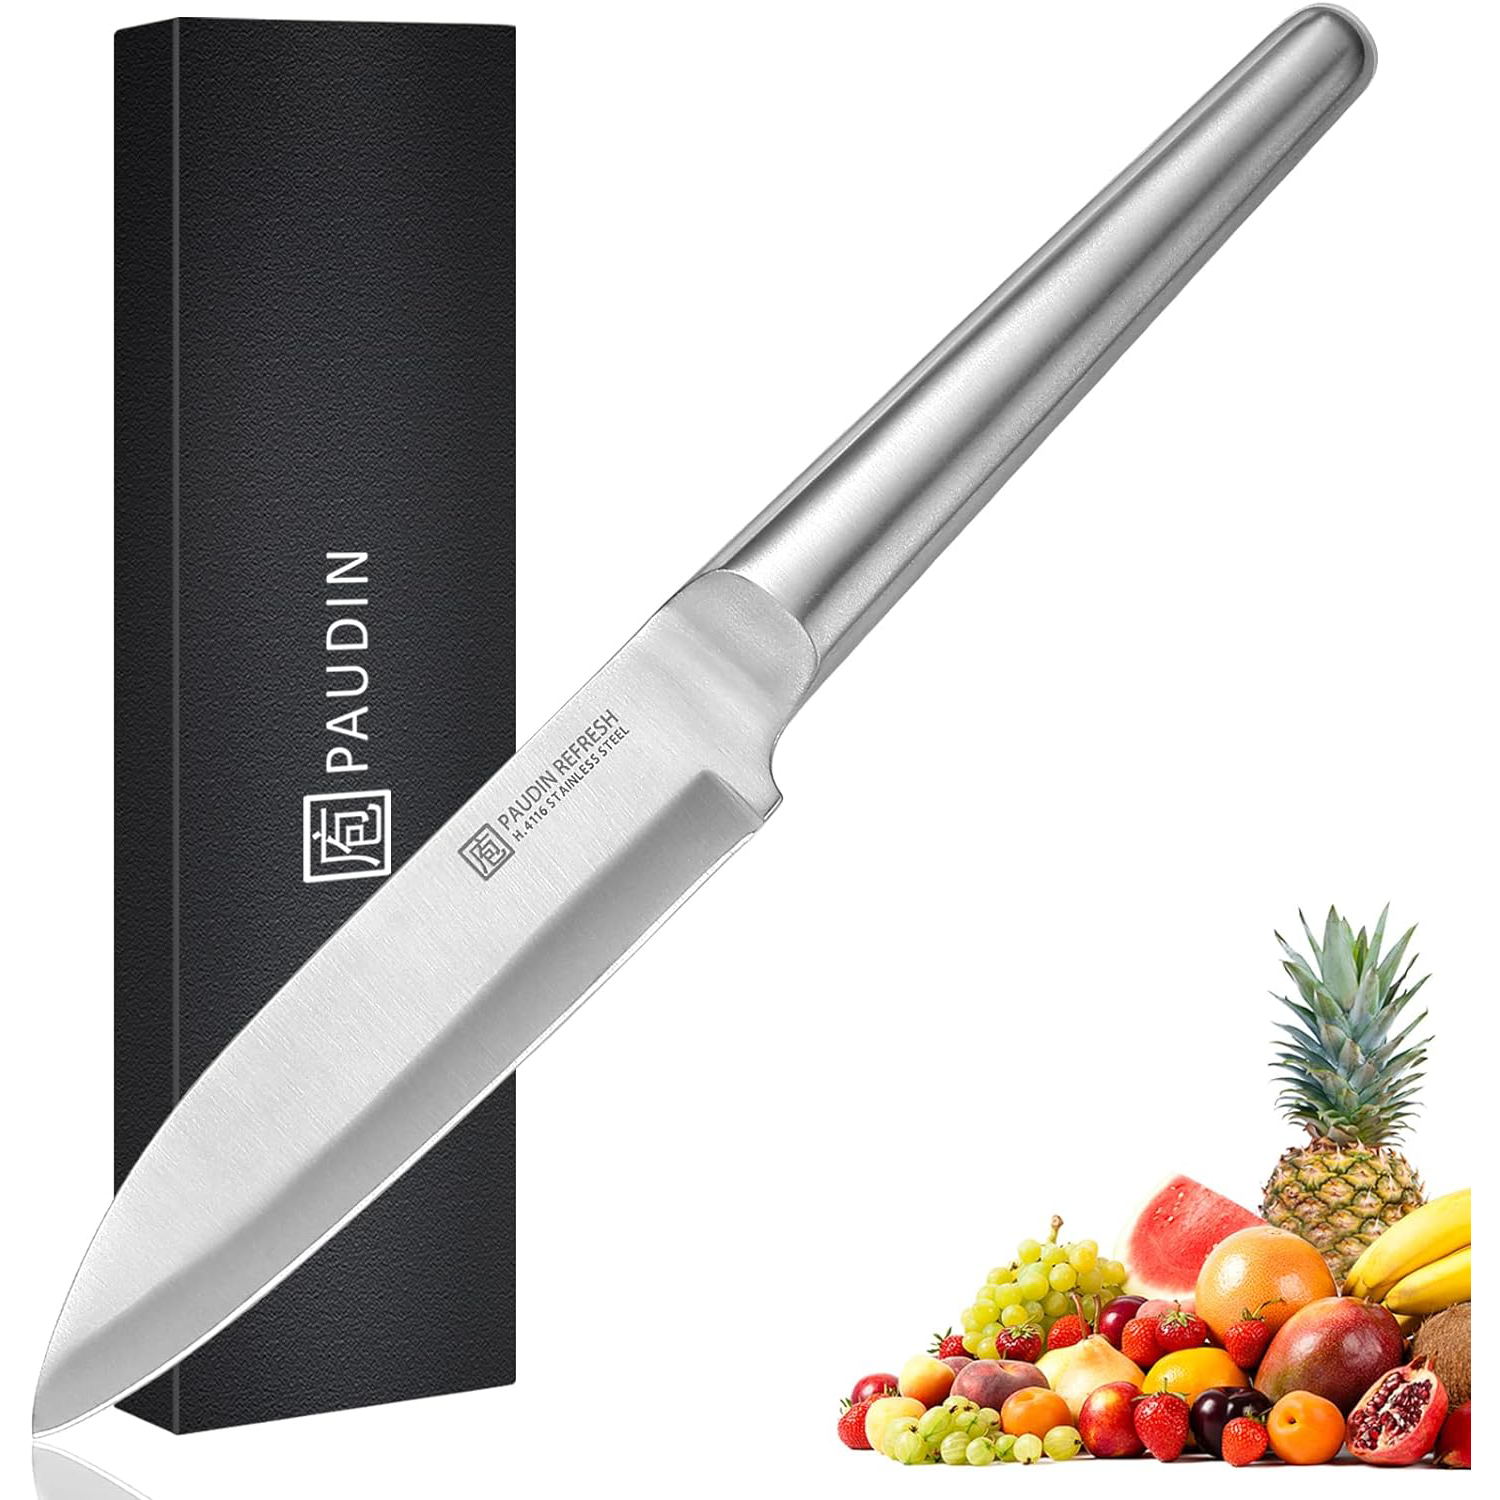 KD 5" Utility Kitchen Knife German Stainless Steel with Gift Box